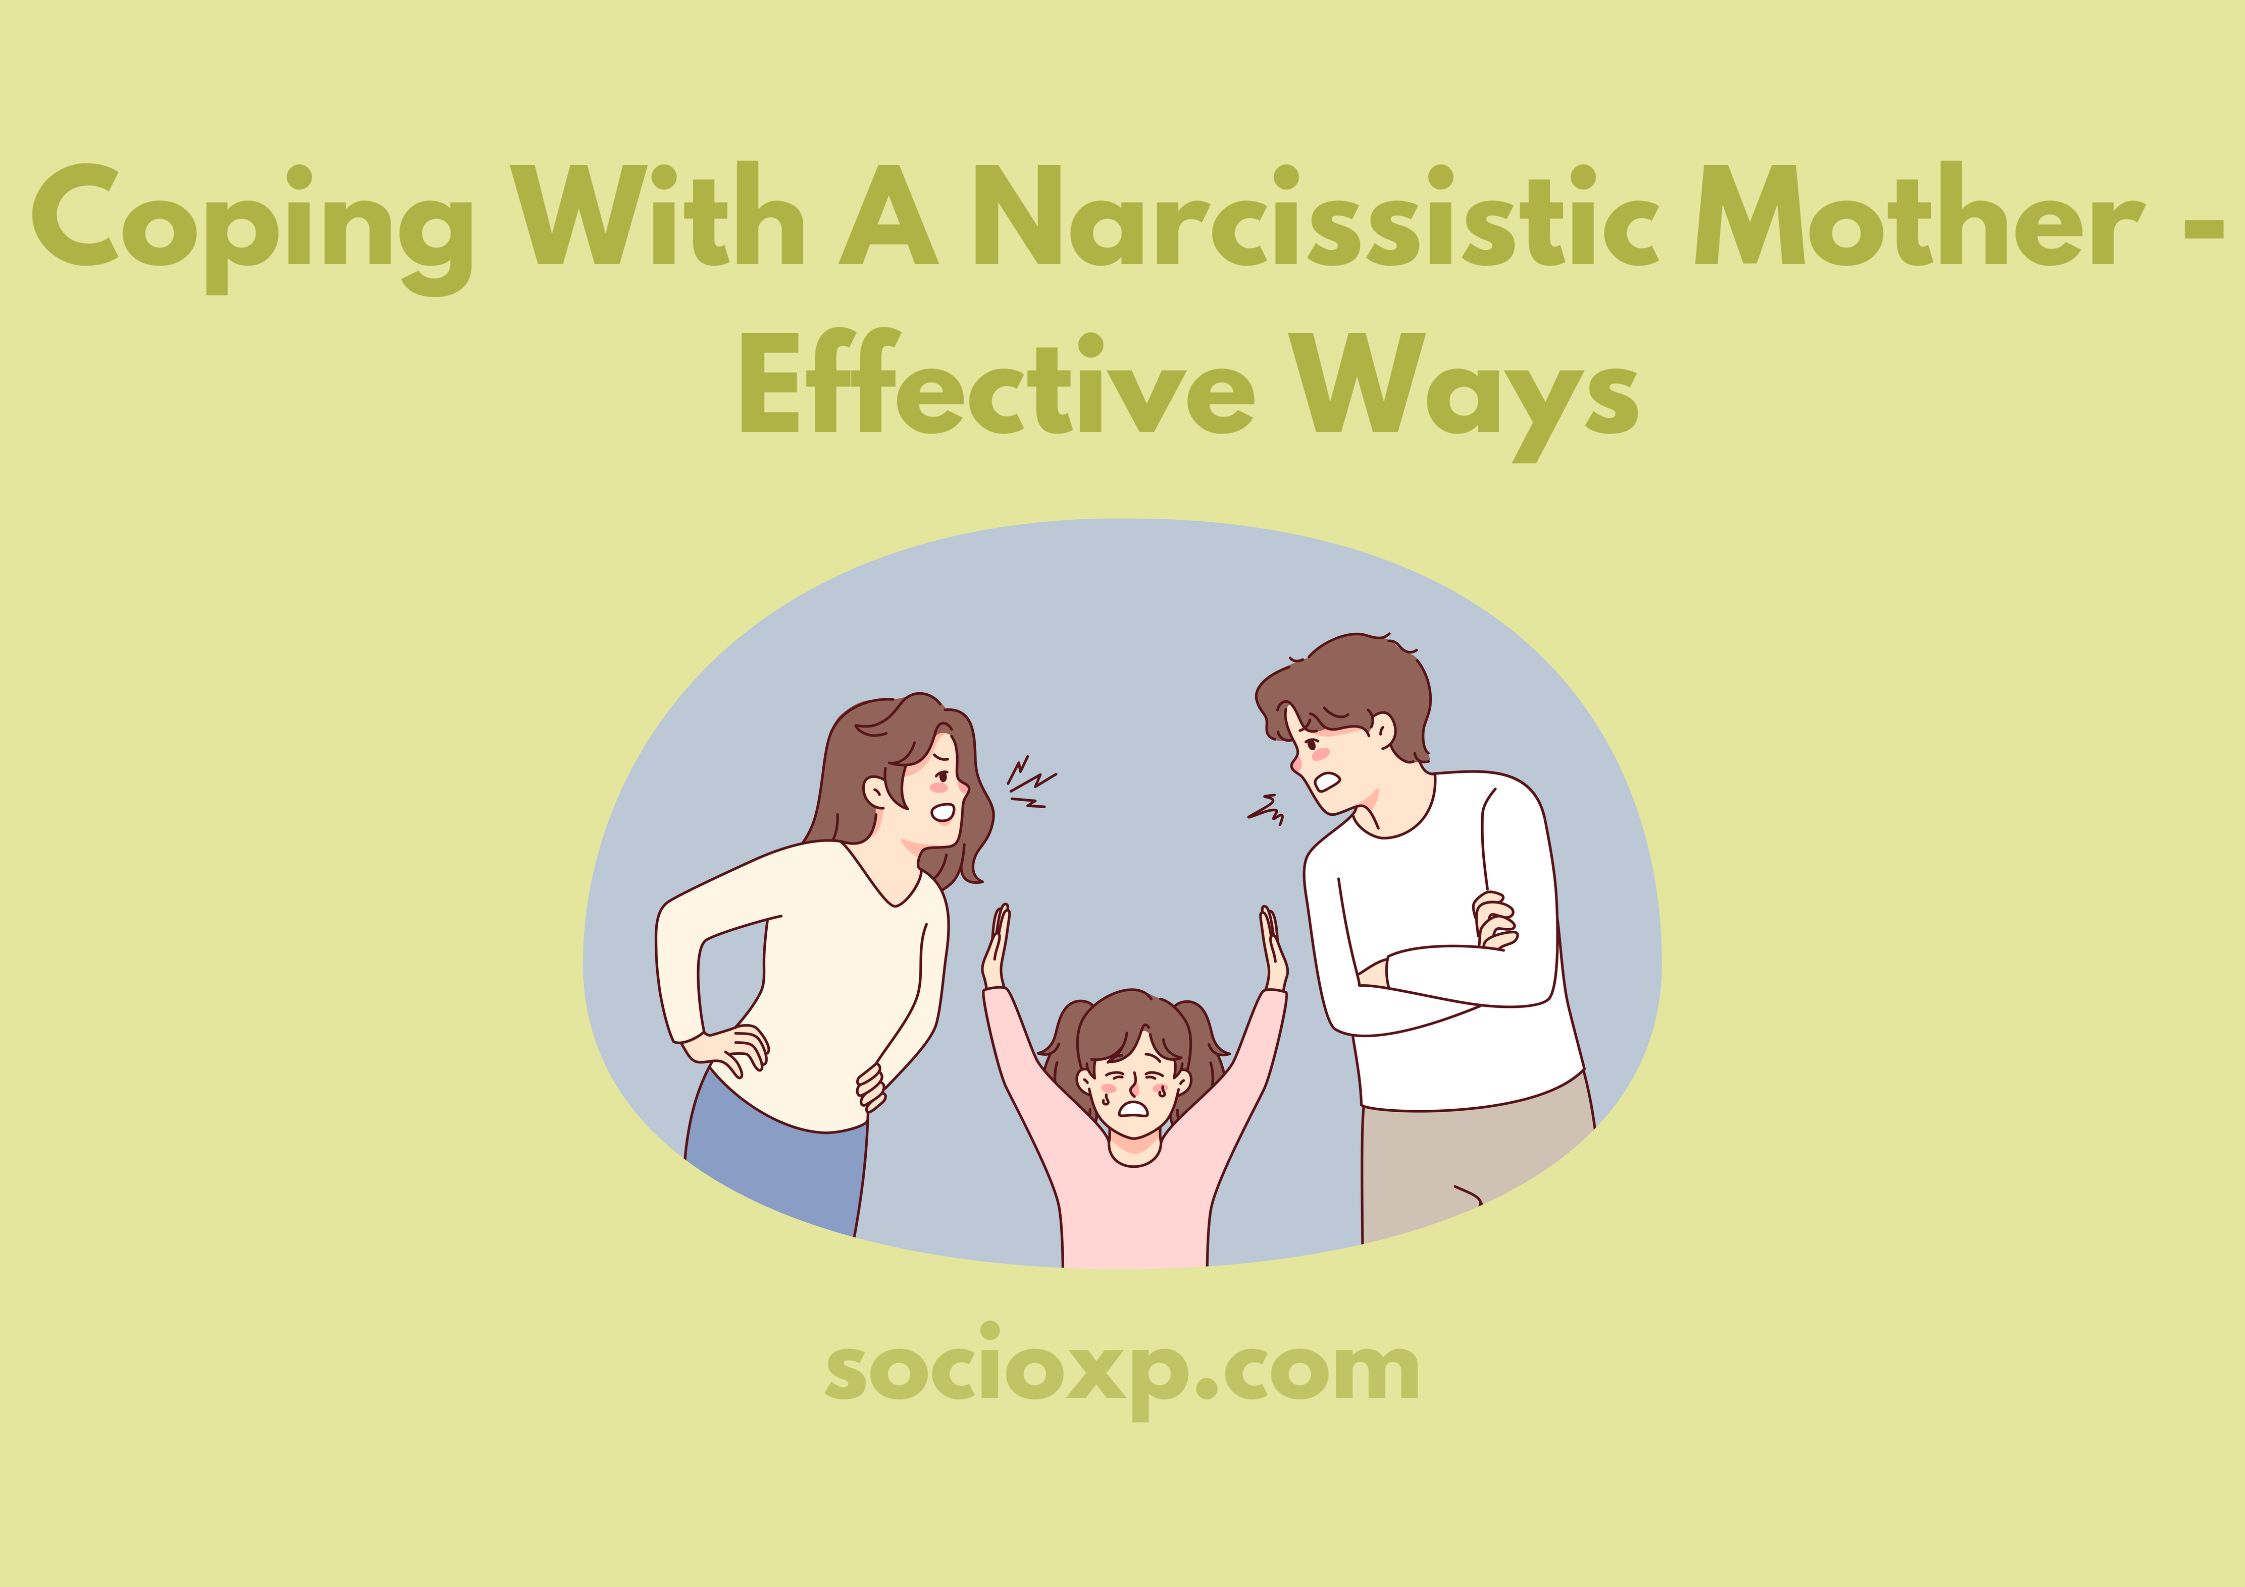 Coping With A Narcissistic Mother - 9 Effective Ways